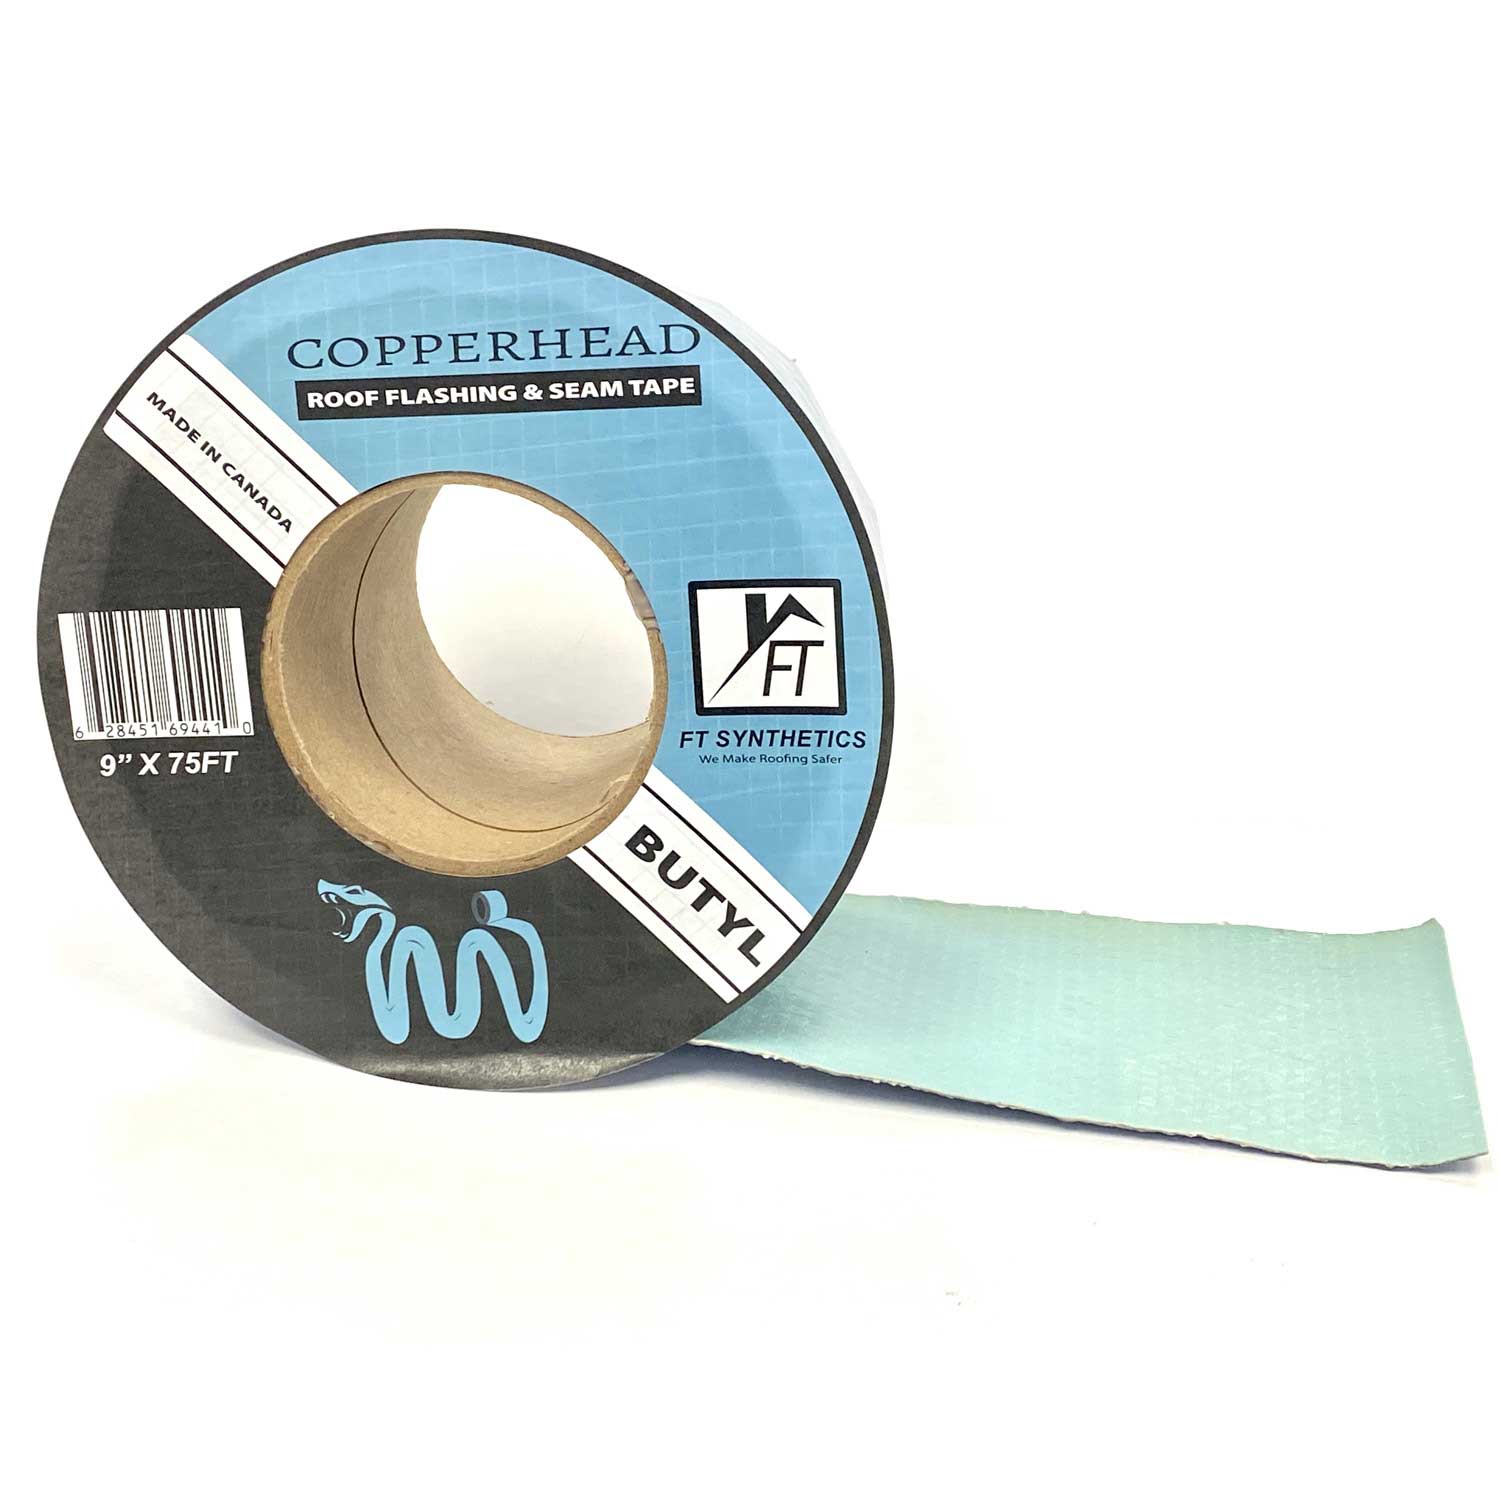 FT Synthetics Copperhead Roofing Seam Tape